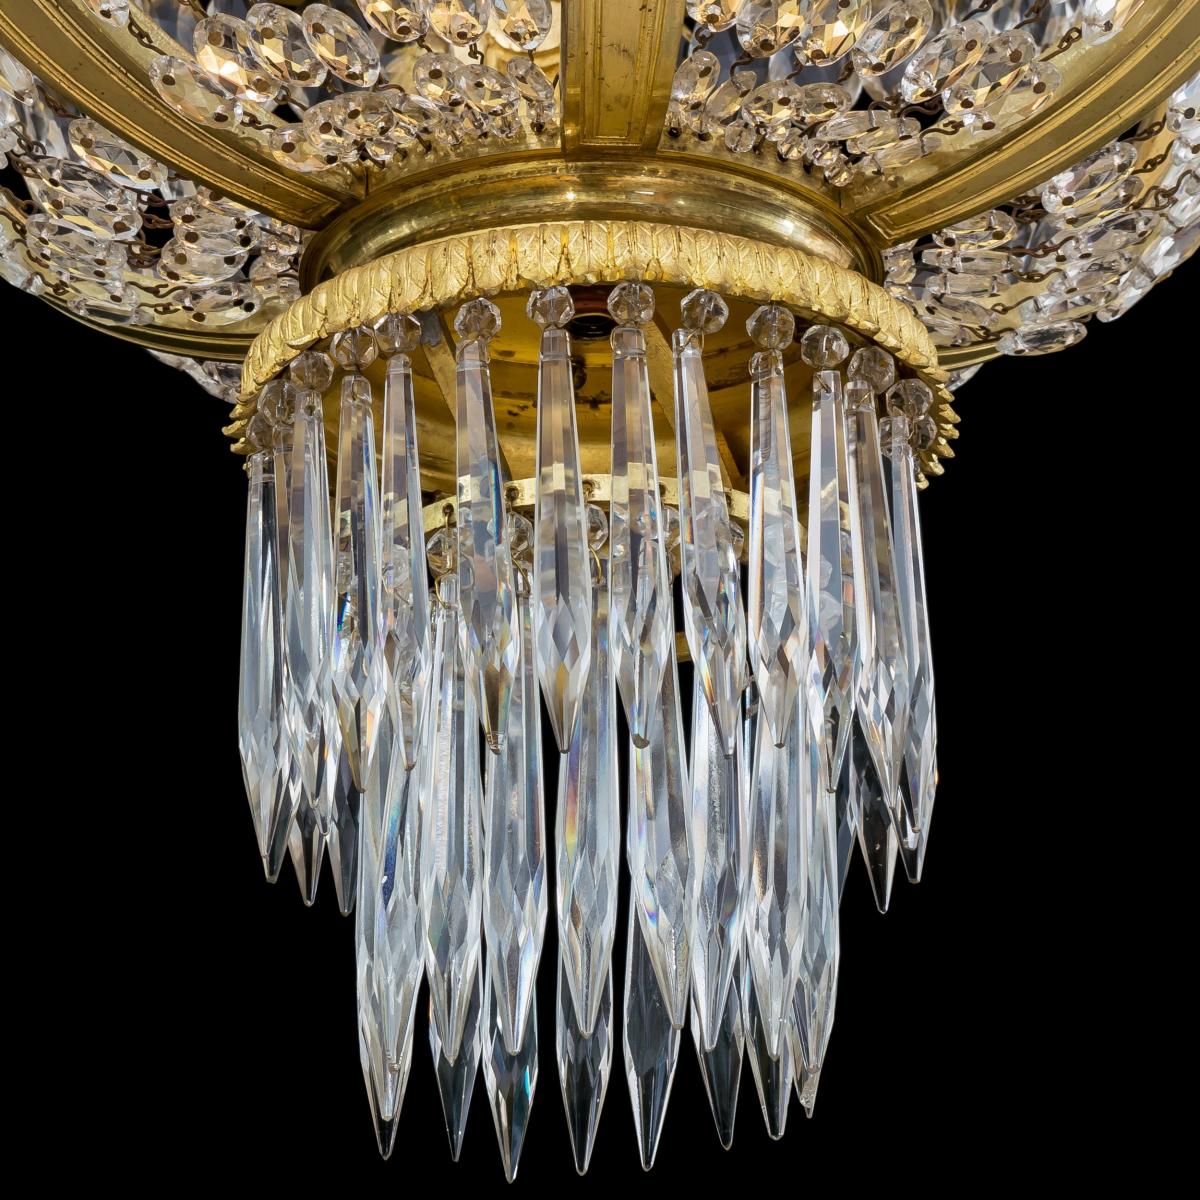 An Important Pair of Ormolu Basket Chandeliers In the Louis XVI Style